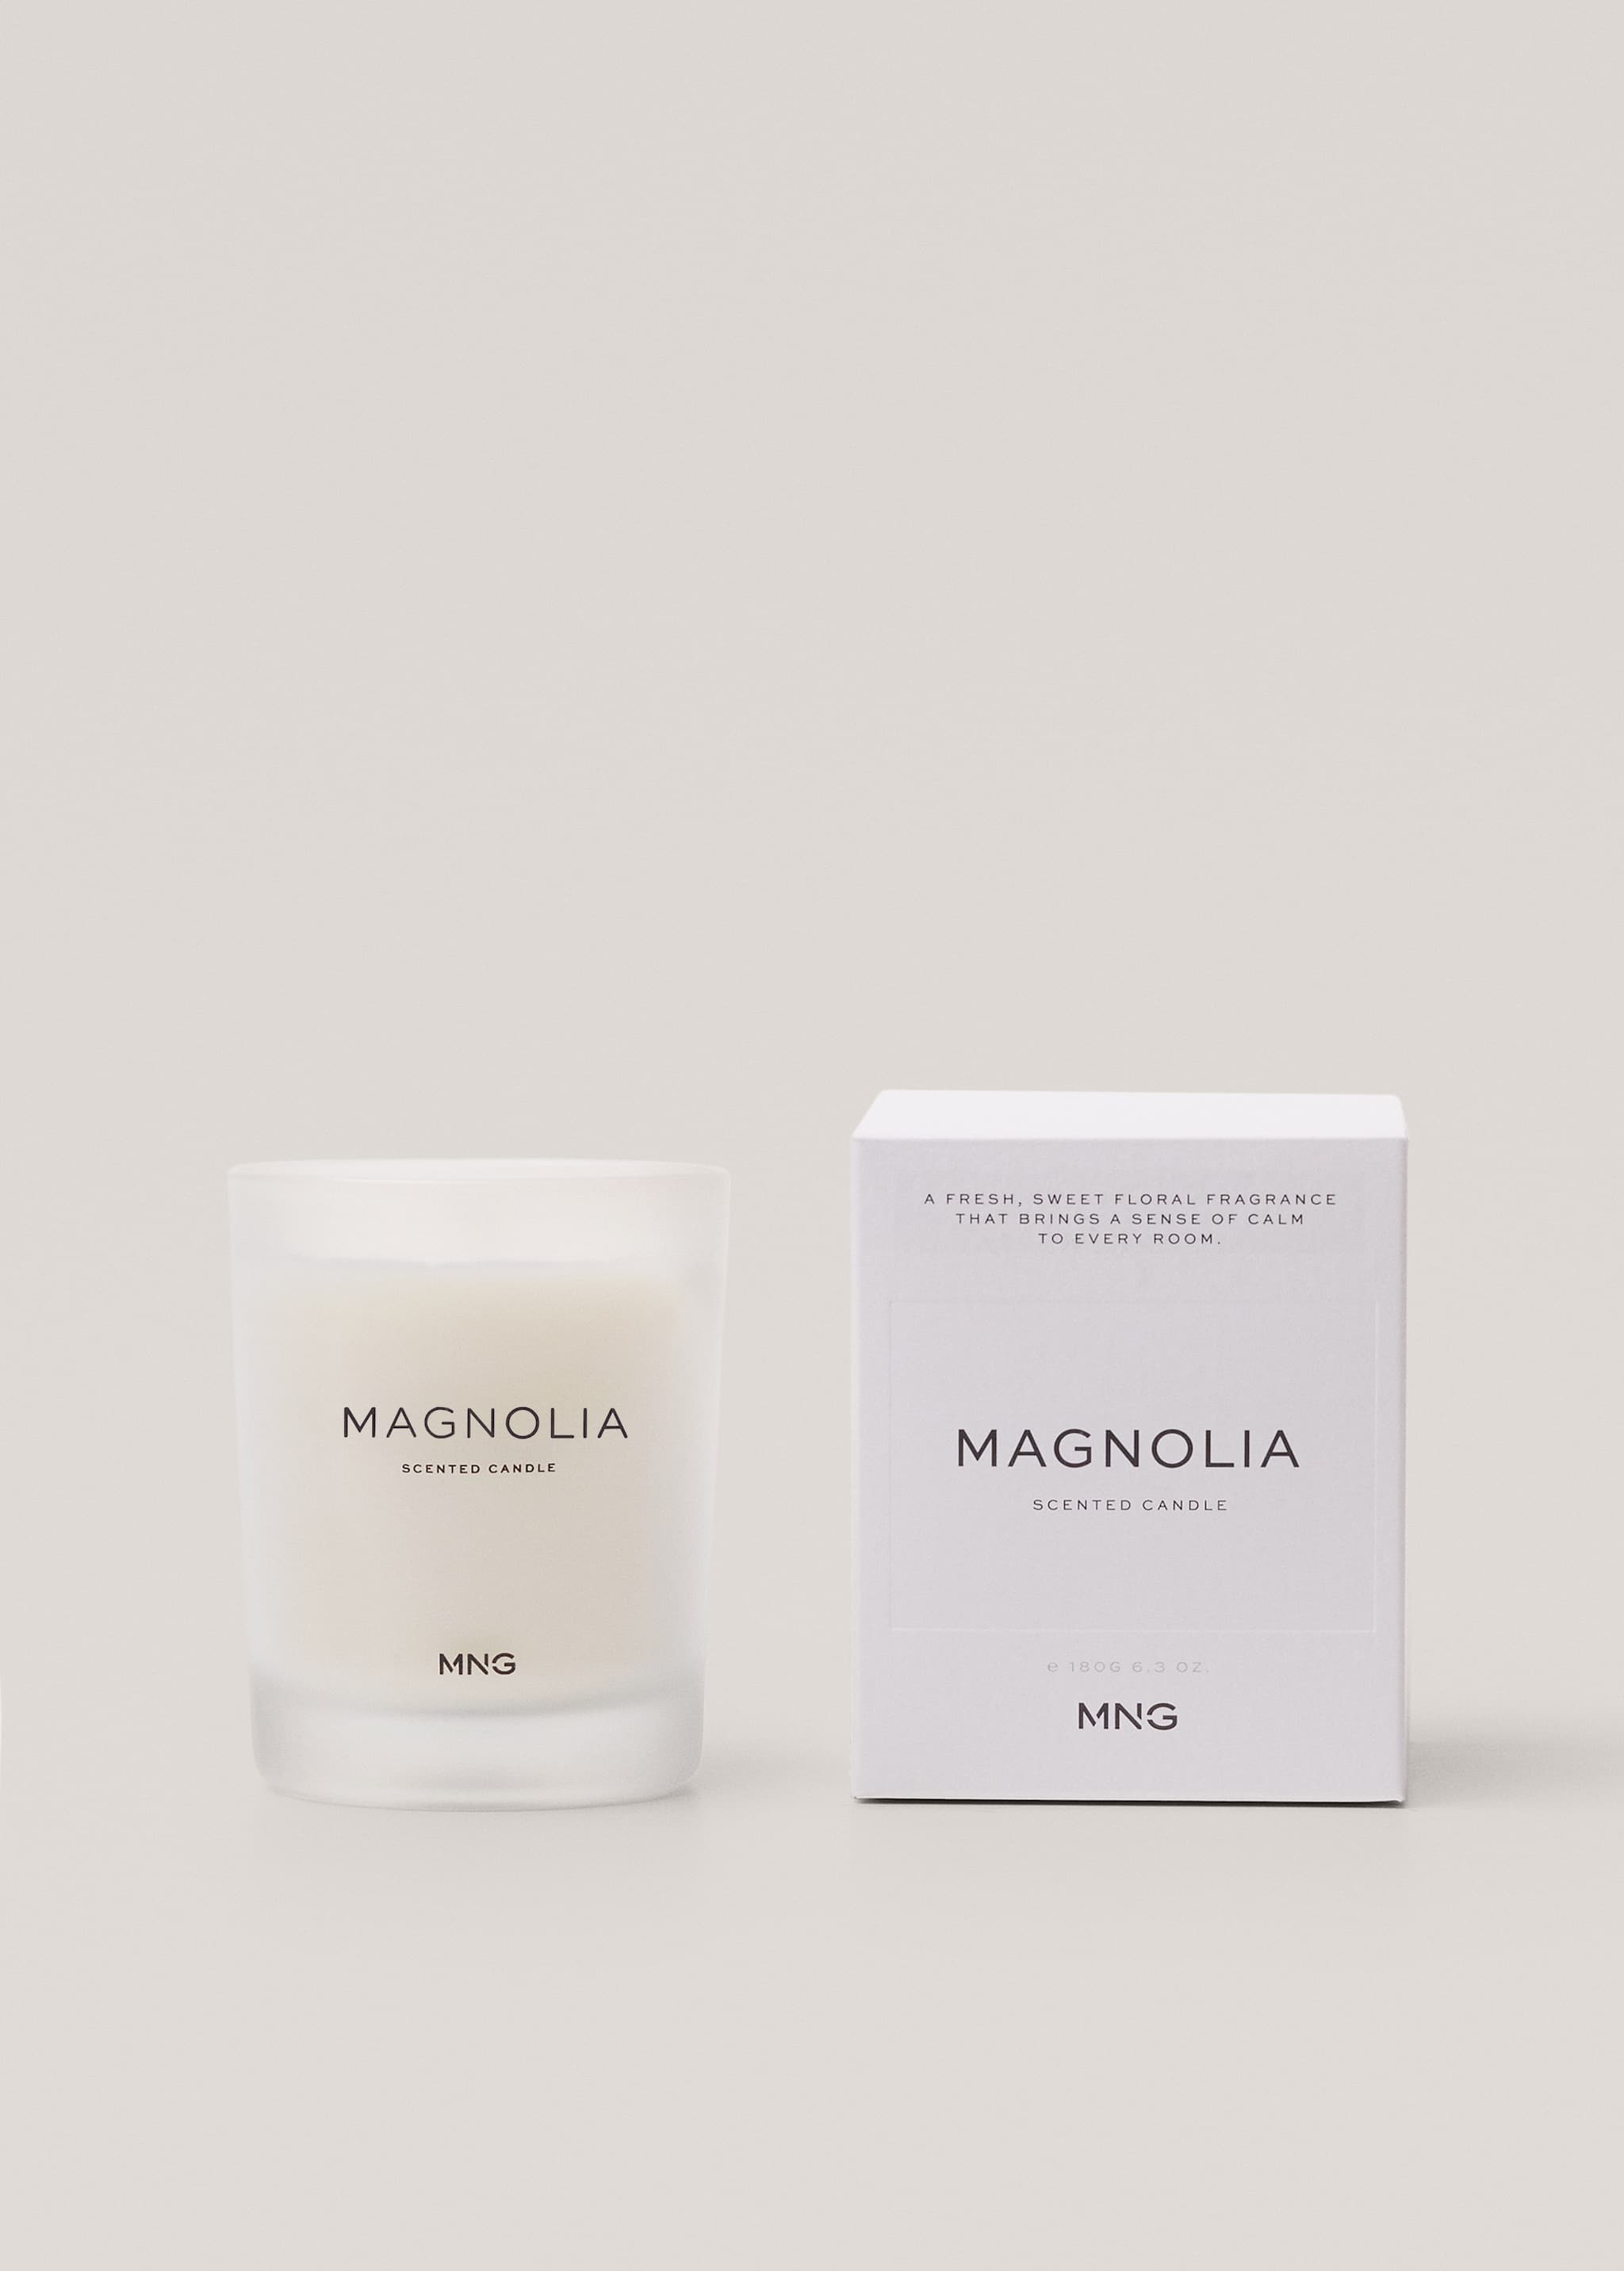 Magnolia scented candle  - Article without model